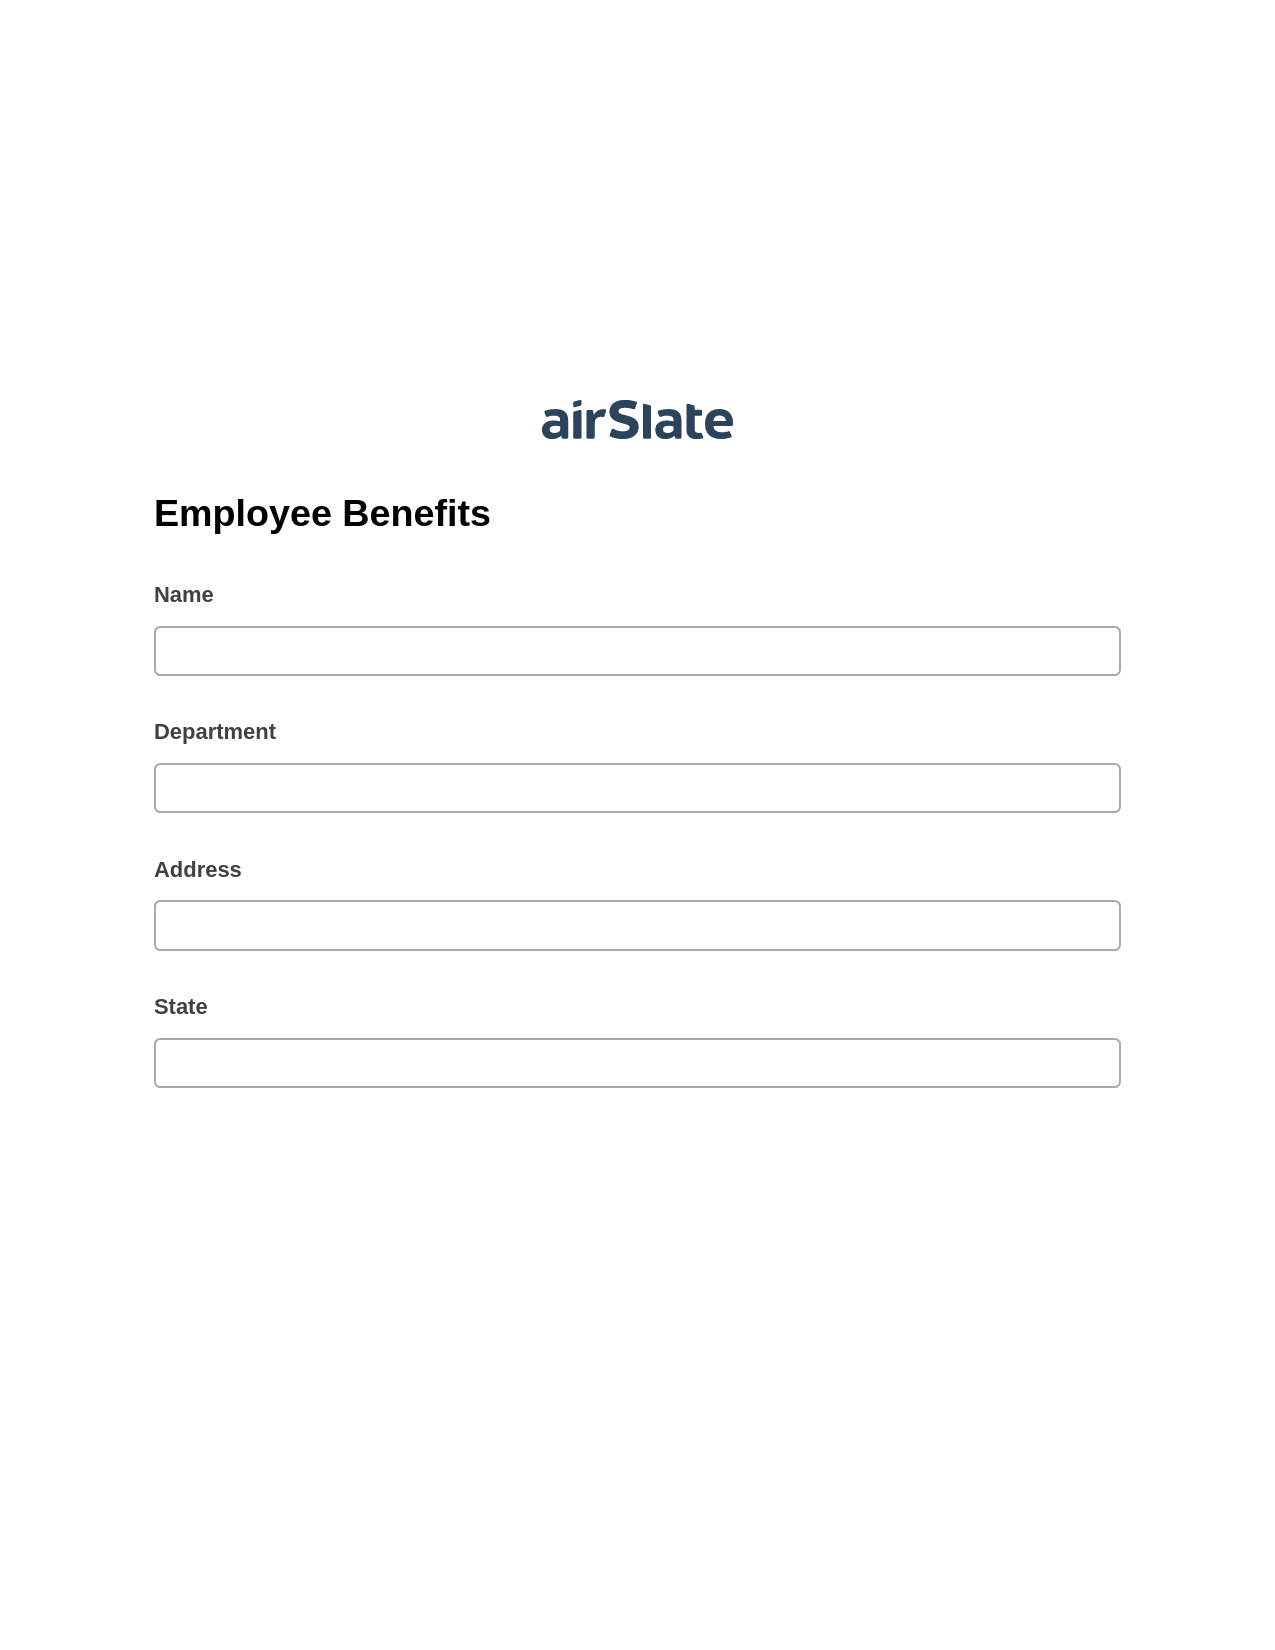 Employee Benefits Pre-fill from another Slate Bot, Assign Slate Name Bot, Export to Excel 365 Bot